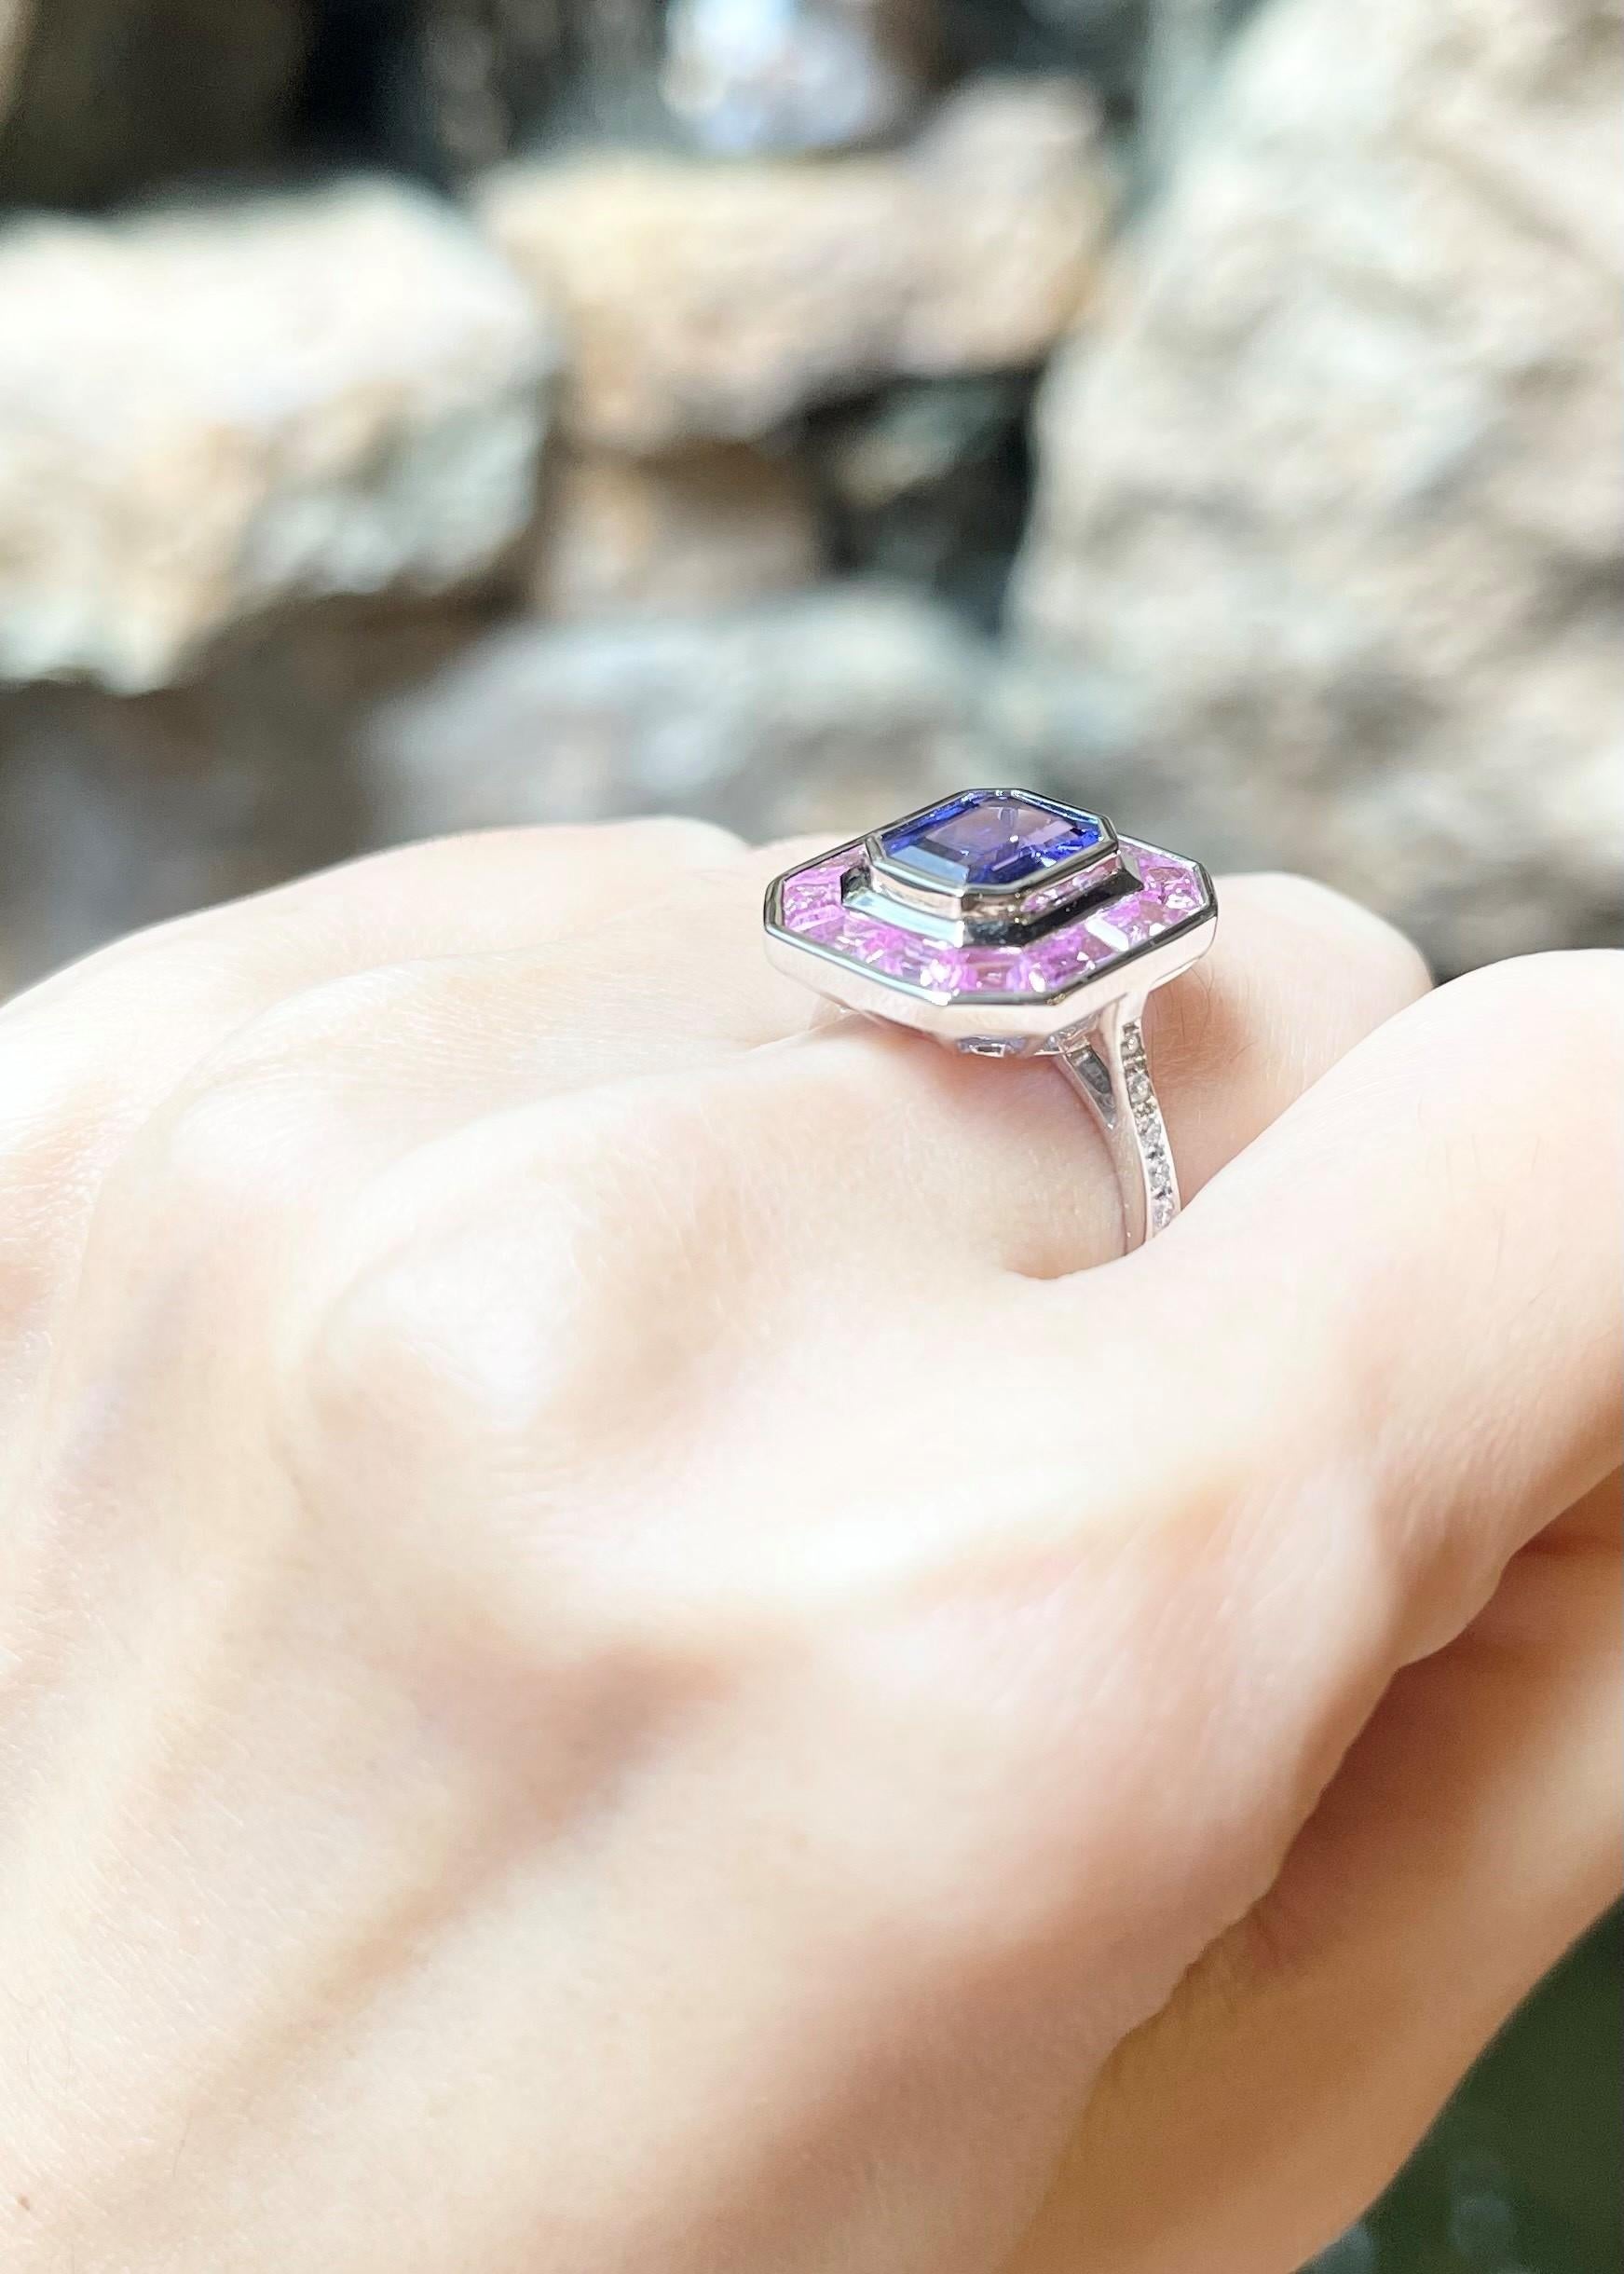 Tanzanite 2.17 carats, Pink Sapphire 2.35 carats and Diamond 0.14 carat Ring set in 18K White Gold Settings

Width:  1.5 cm 
Length: 1.7 cm
Ring Size: 53
Total Weight: 7.69 grams

